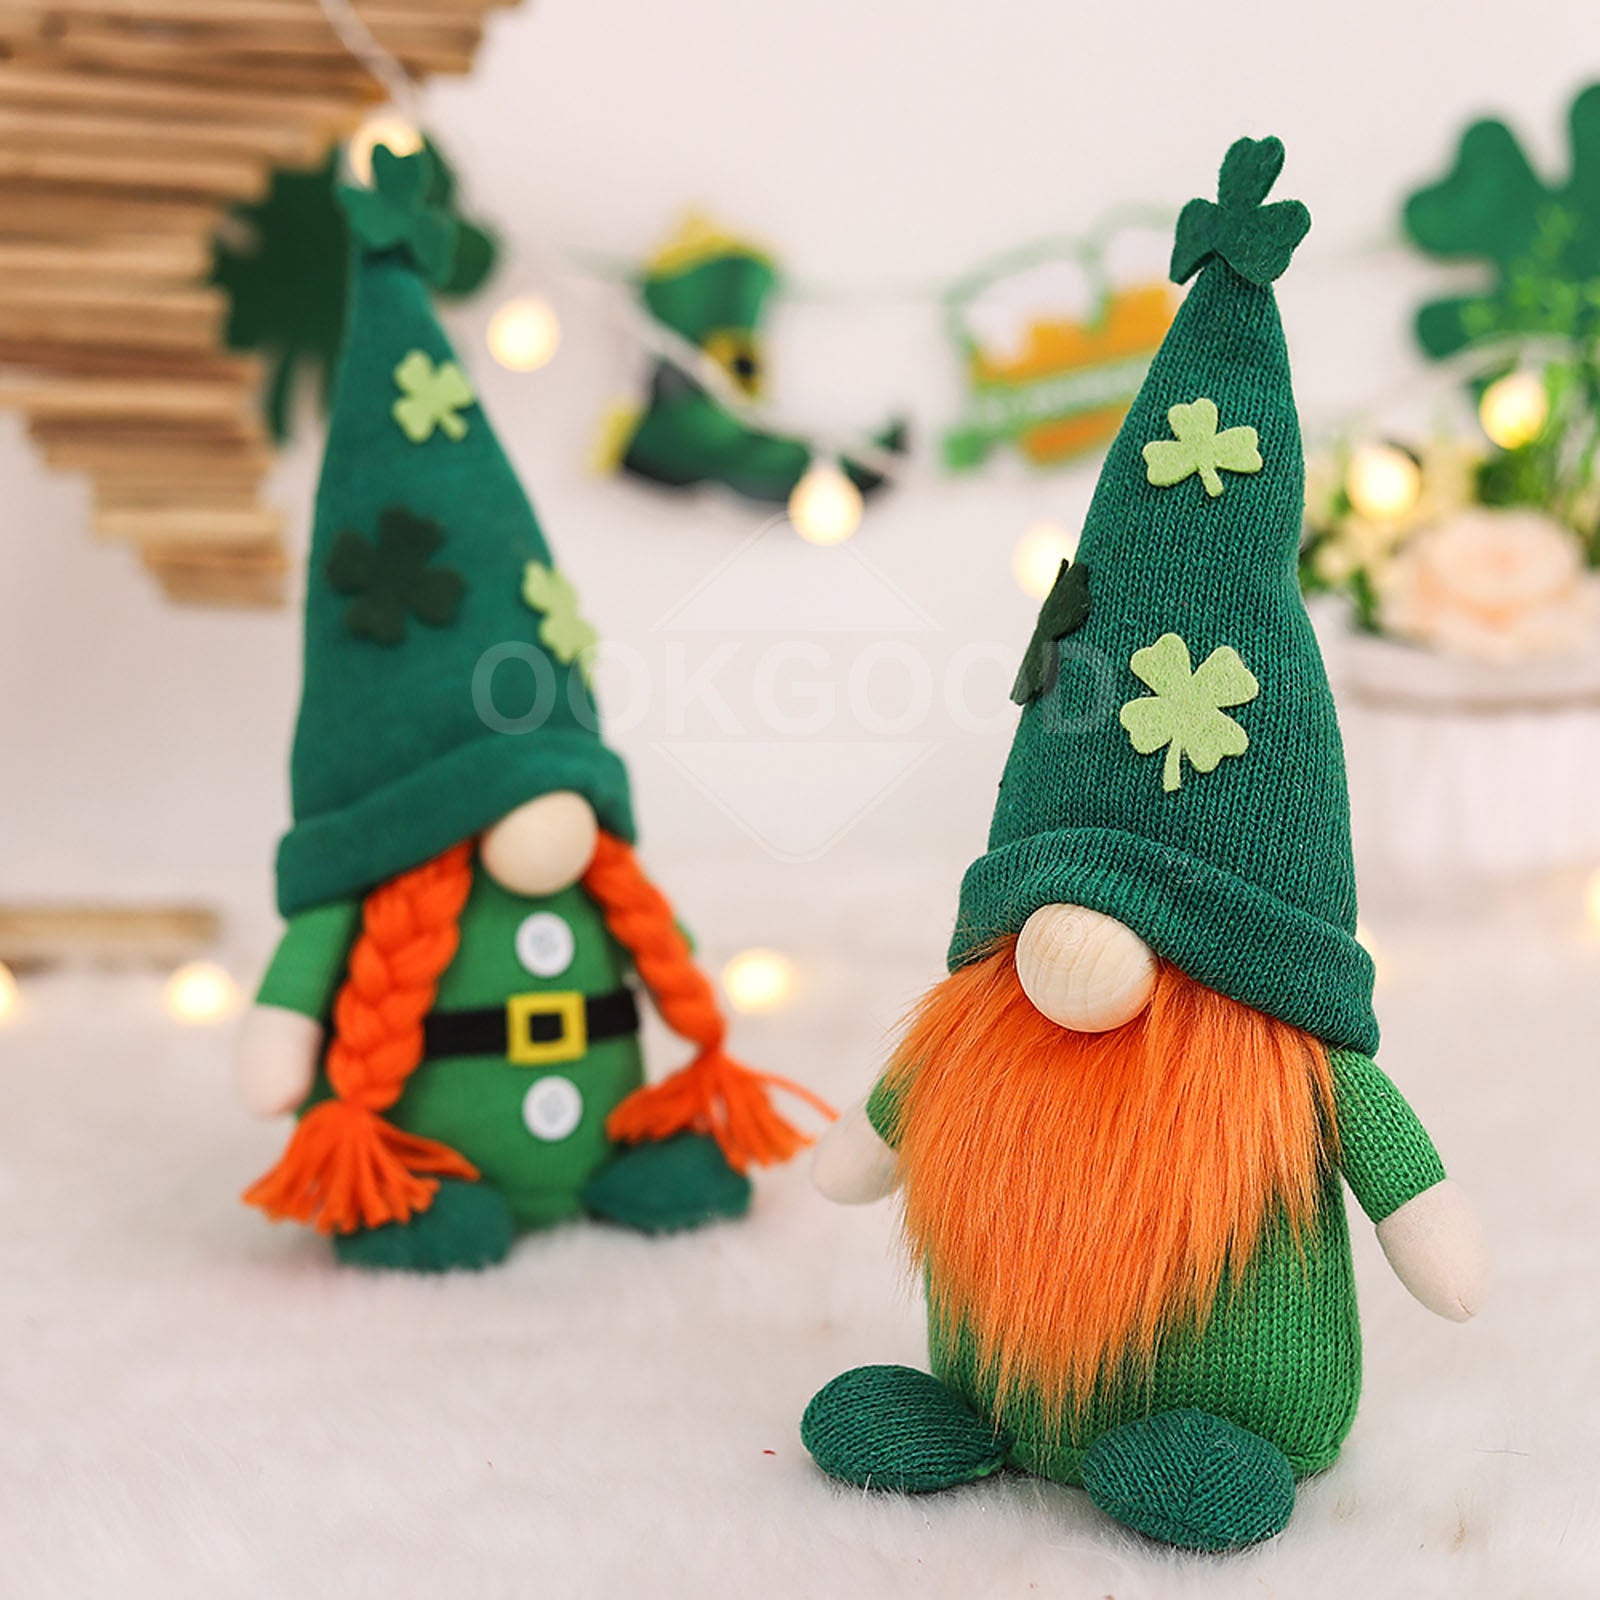 Adorable St. Patrick's Day Gnome Couple For Holiday Gift